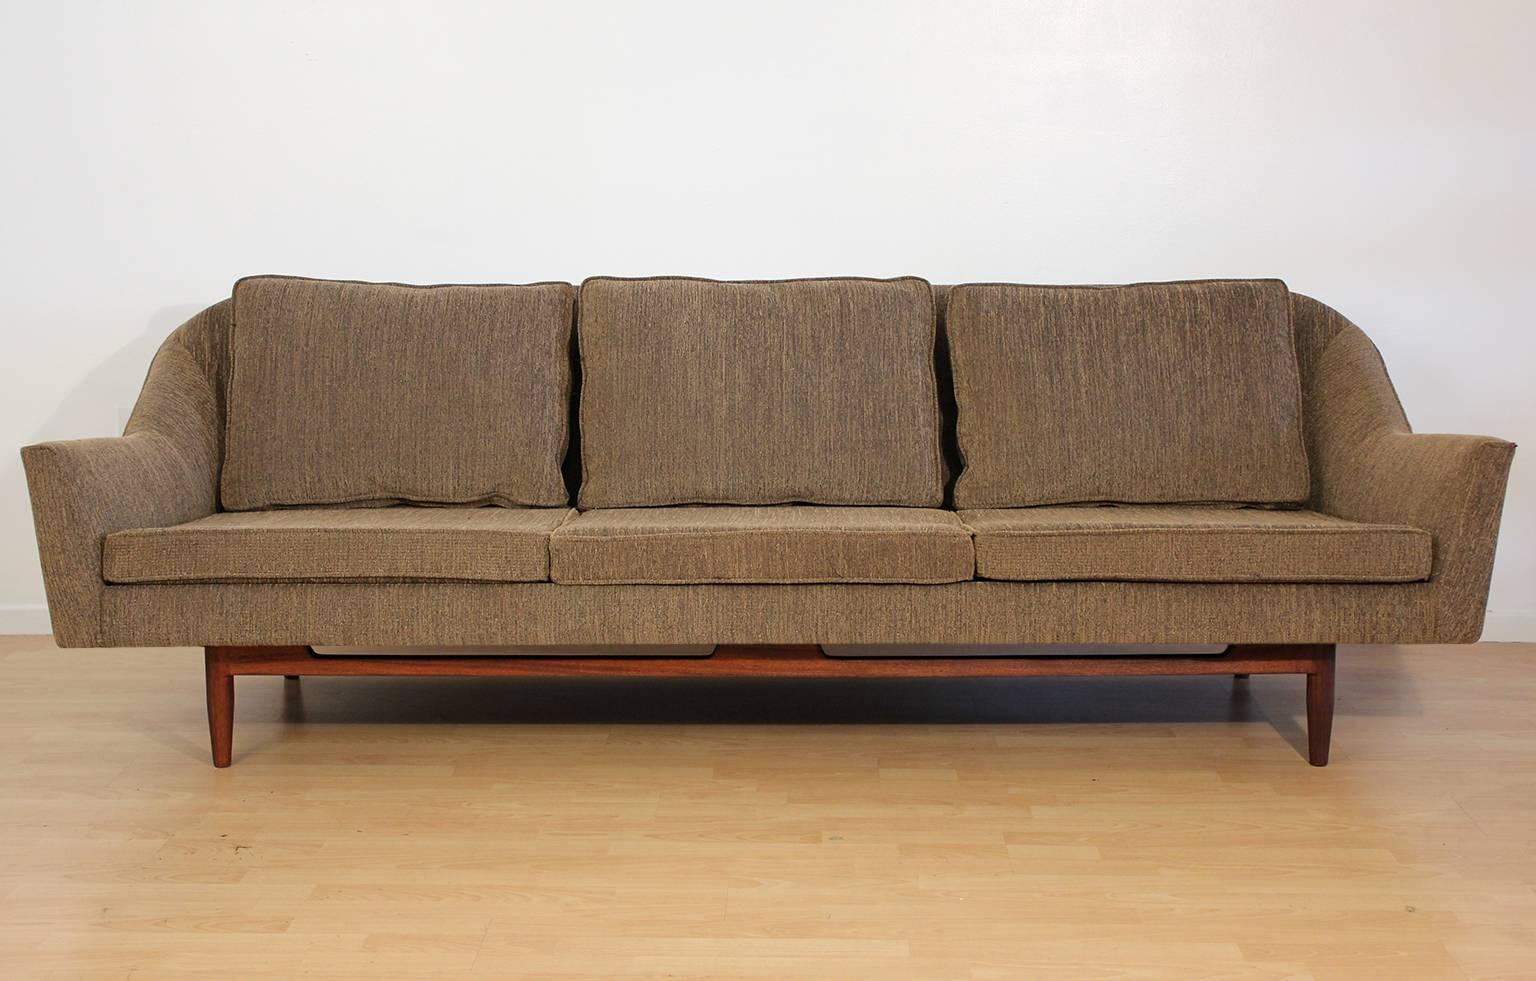 Completely restored Jens Risom designed sofa for Jens Risom, Inc. circa 1950s. Great design and form. Walnut base has been restored and sofa has new upholstery and foam. New back down cushions. Very comfortable sofa.